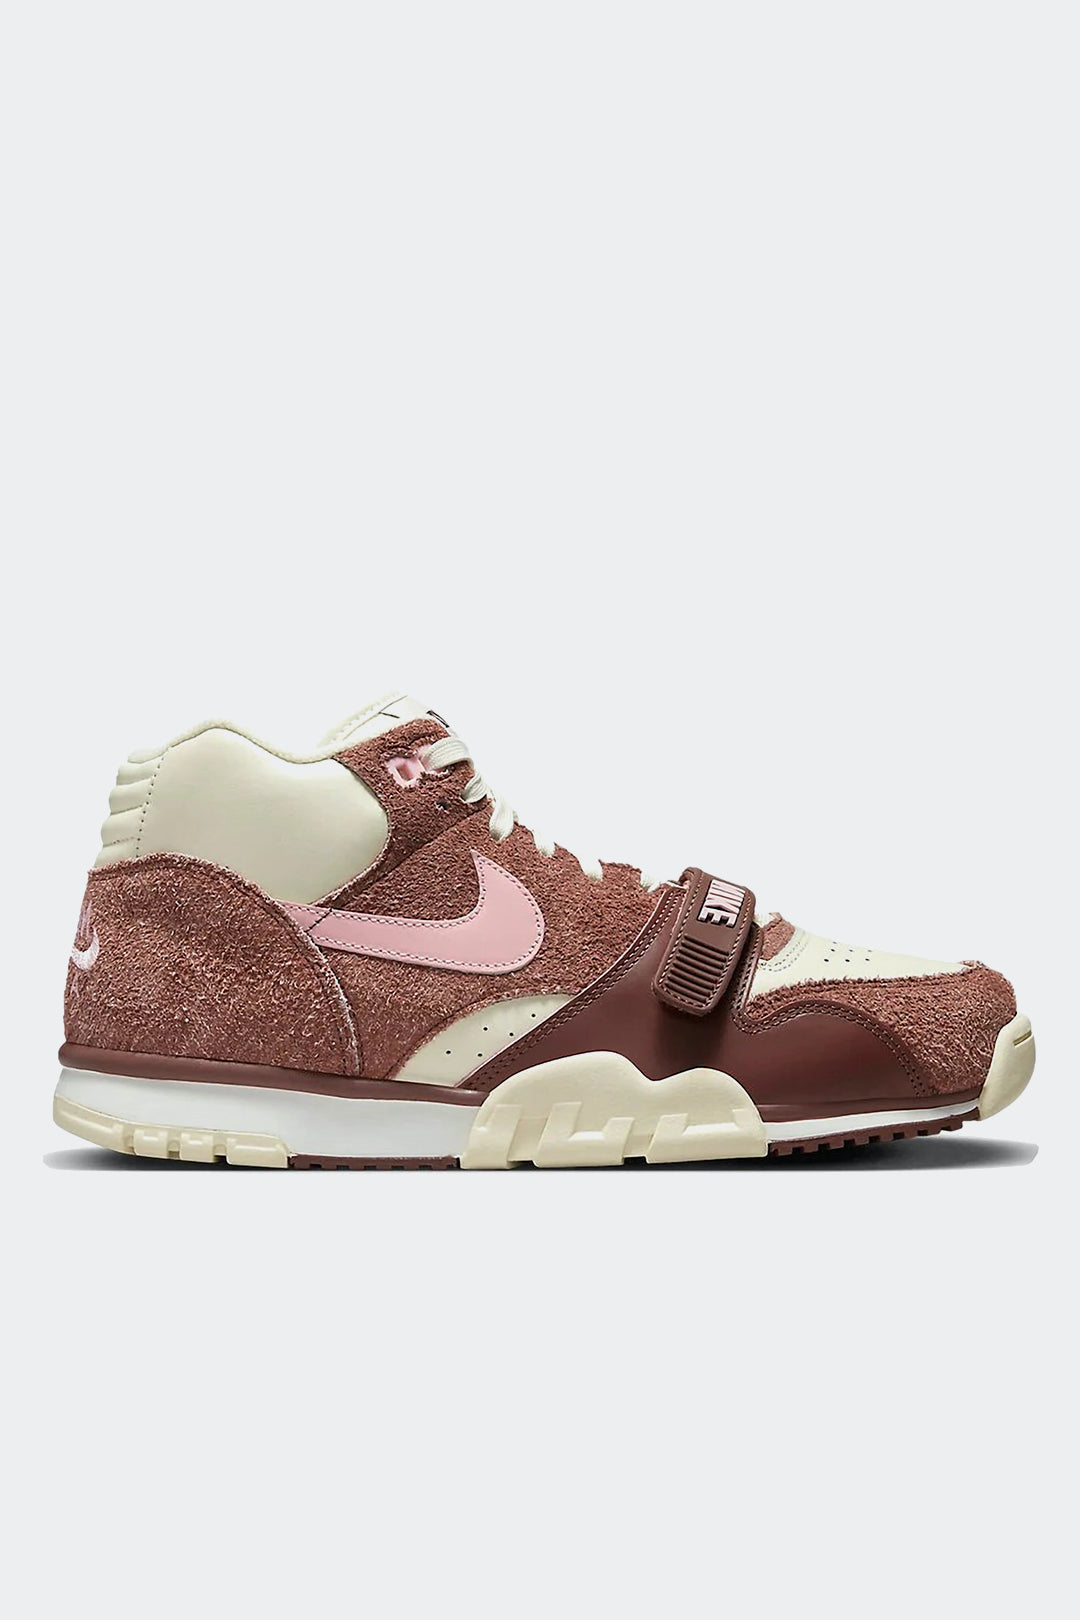 NIKE AIR TRAINER 1 "VALENTINE'S DAY" - HYPE